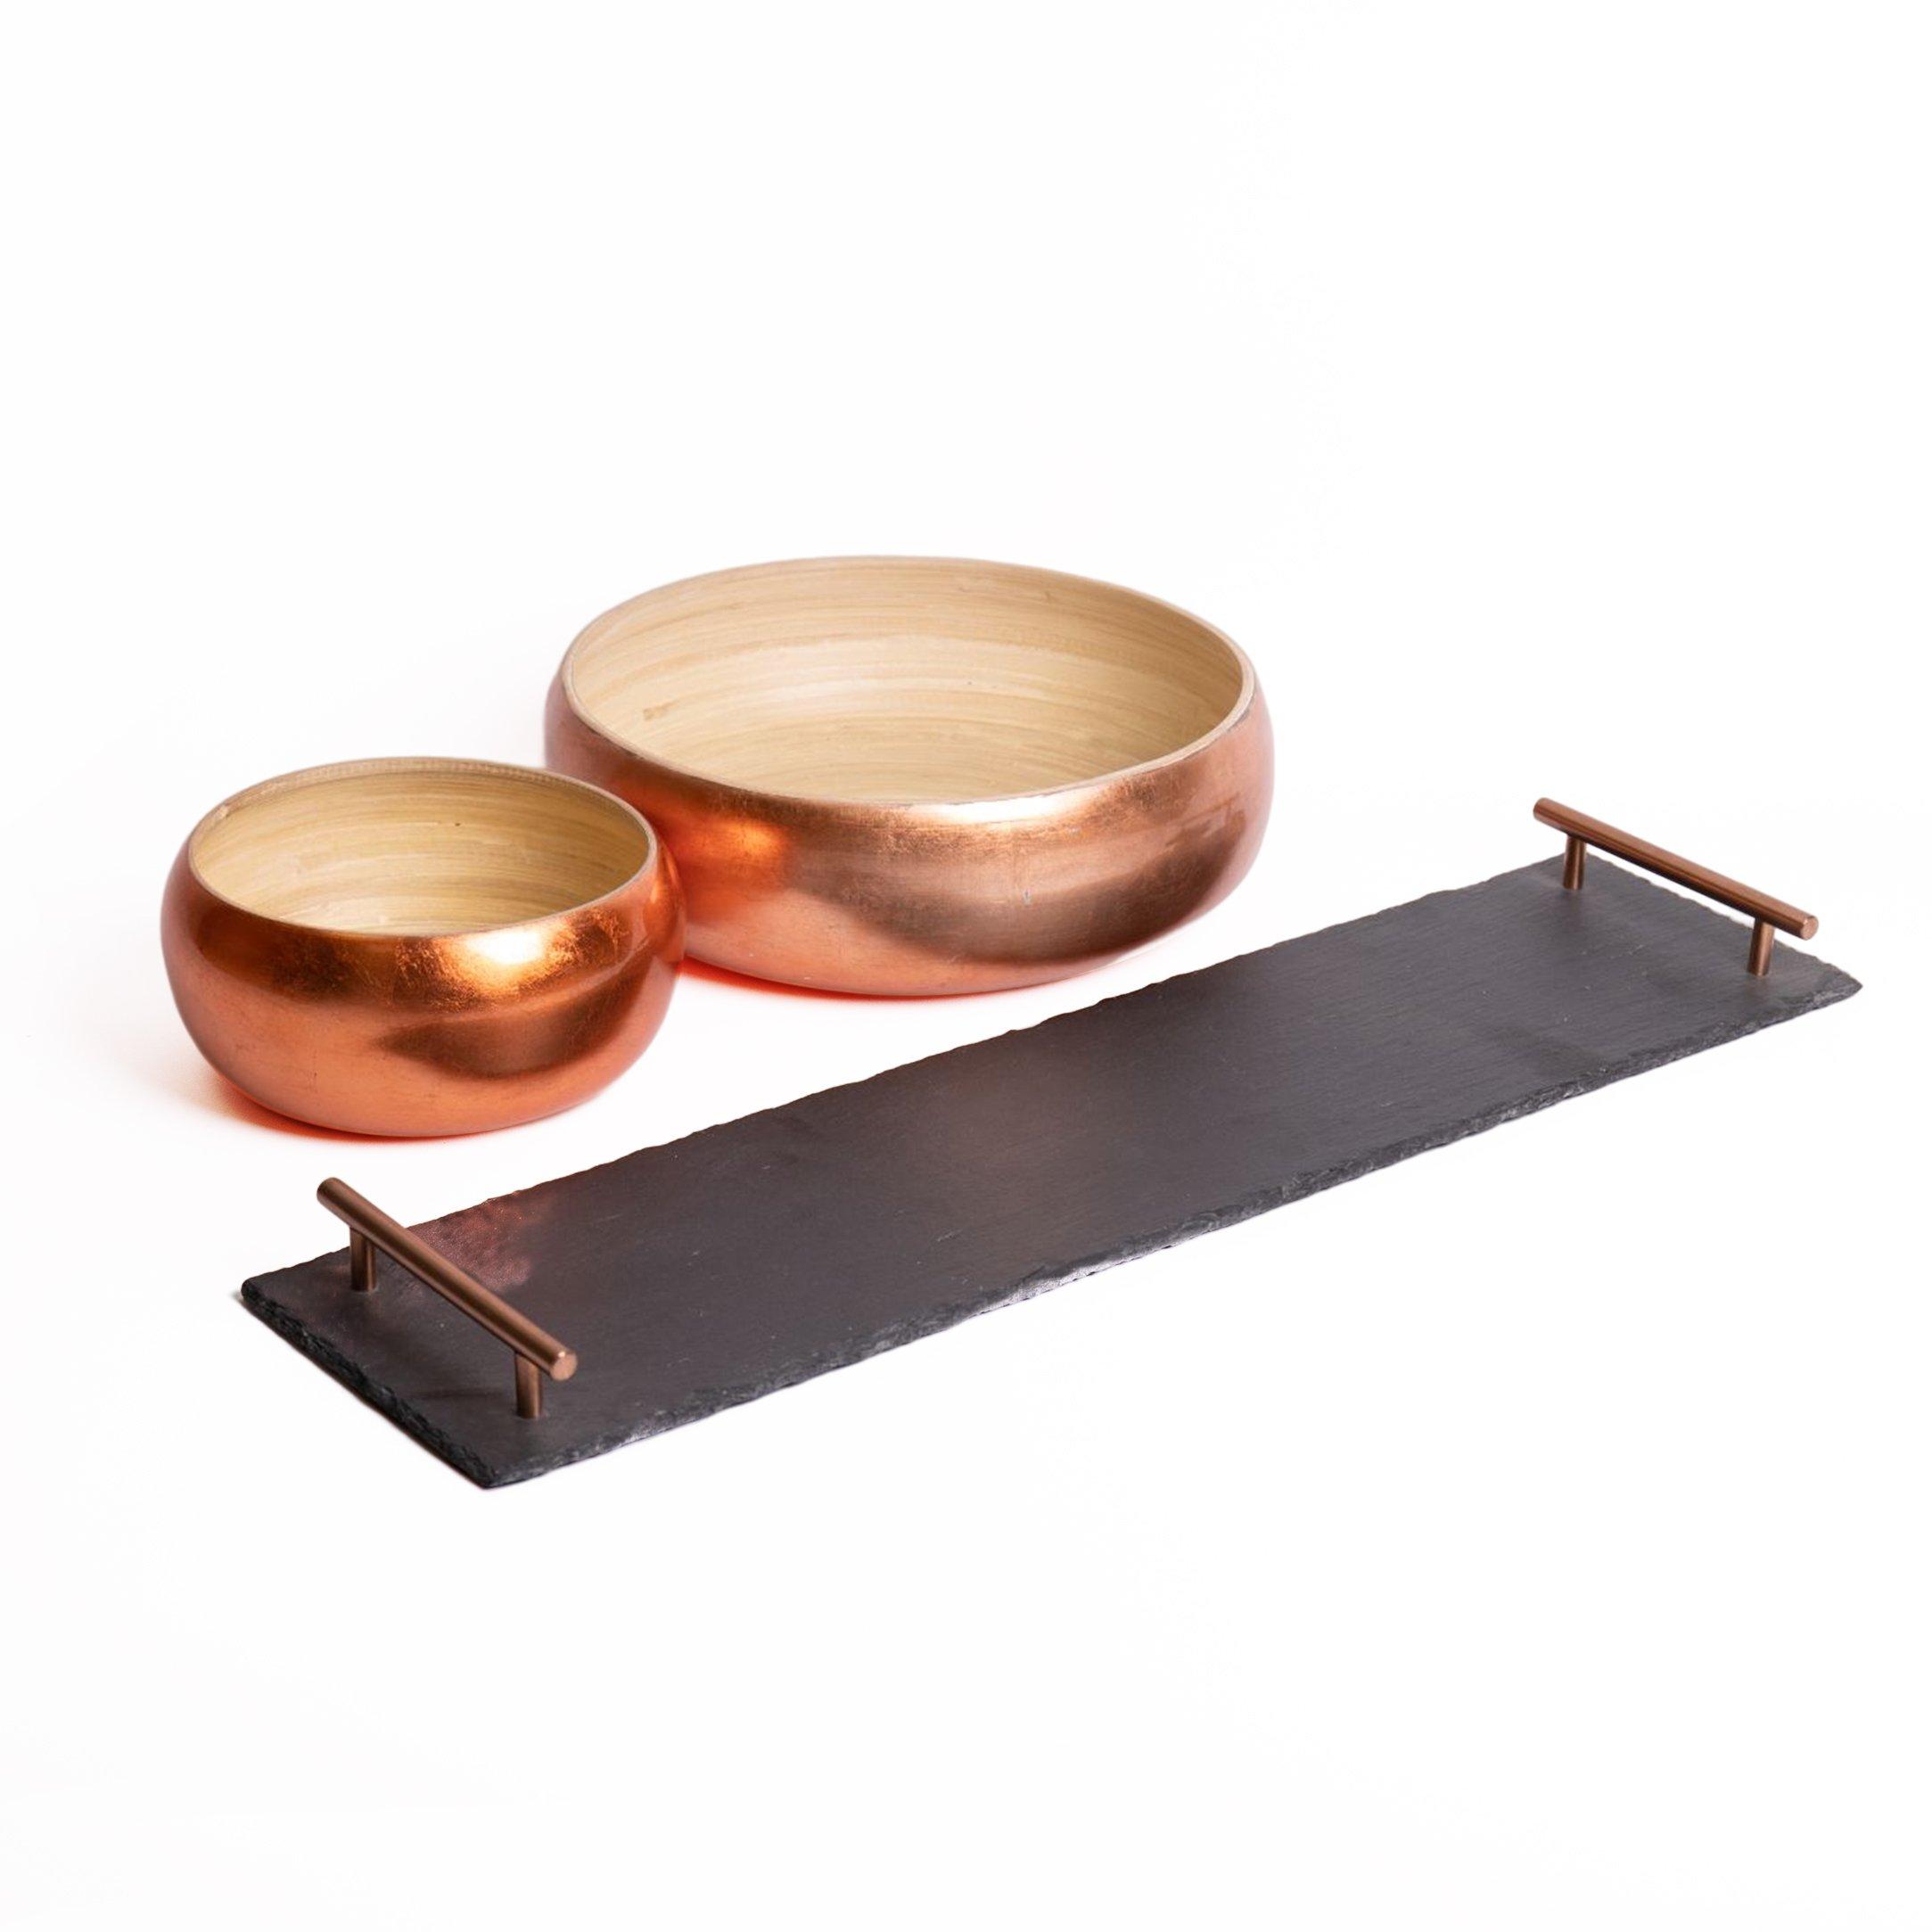 Serveware Set with Medium and Large Bamboo Serving Bowls and Slate Serving Platter with Copper Handl